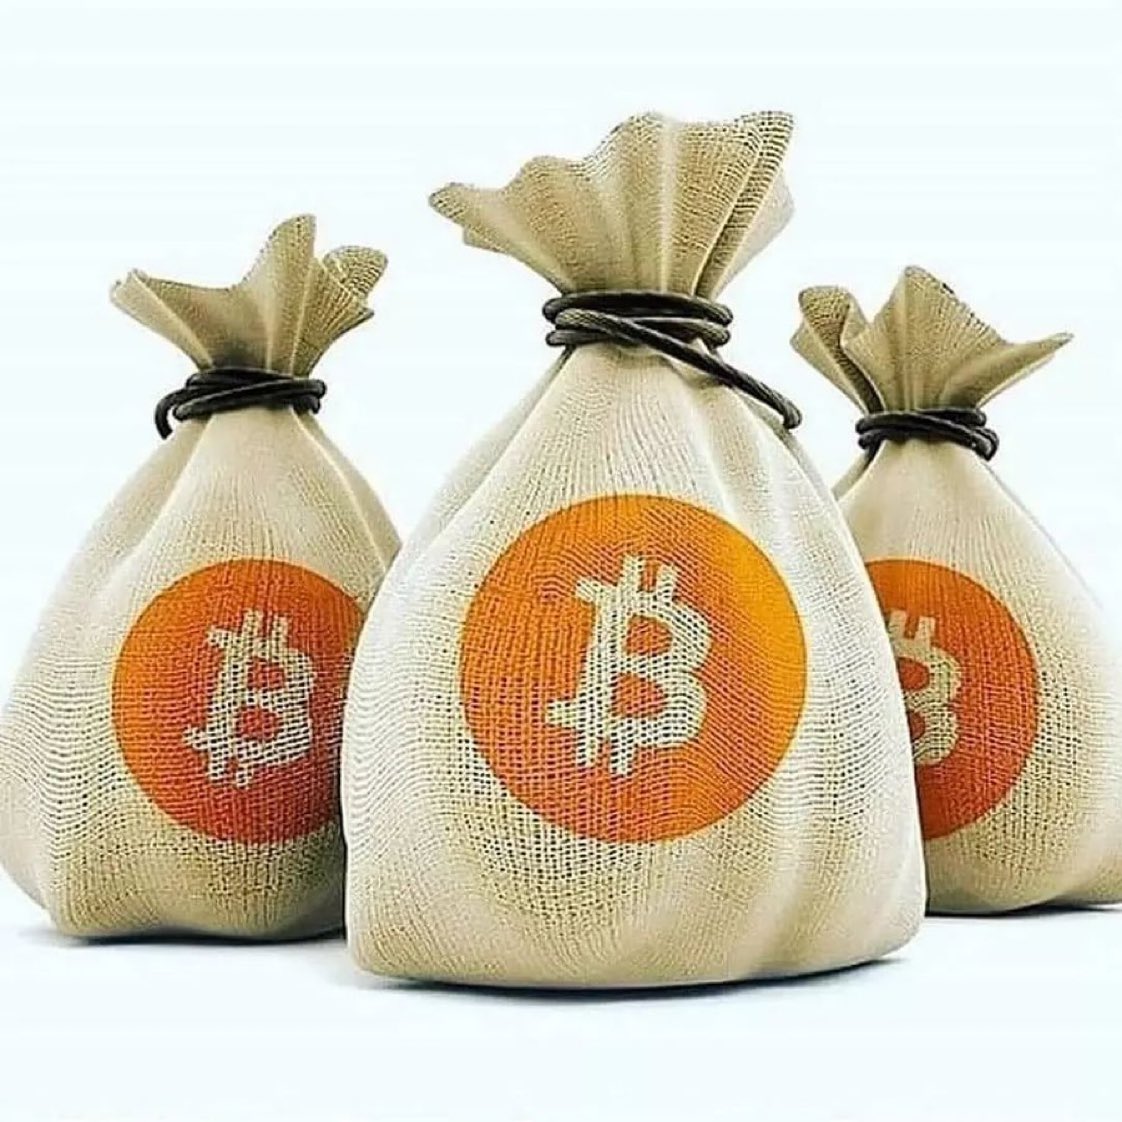 “Bitcoin was created to serve a highly political intent, a free and uncensored network where all can participate with equal access.”
.

#Bitcoin #nairobian #nairobikenya #madeinkenya #gaintrick #gainwithspikes #gainwithmchina #gainwithpaula #gainwithxtiandela #gainwithcrimson